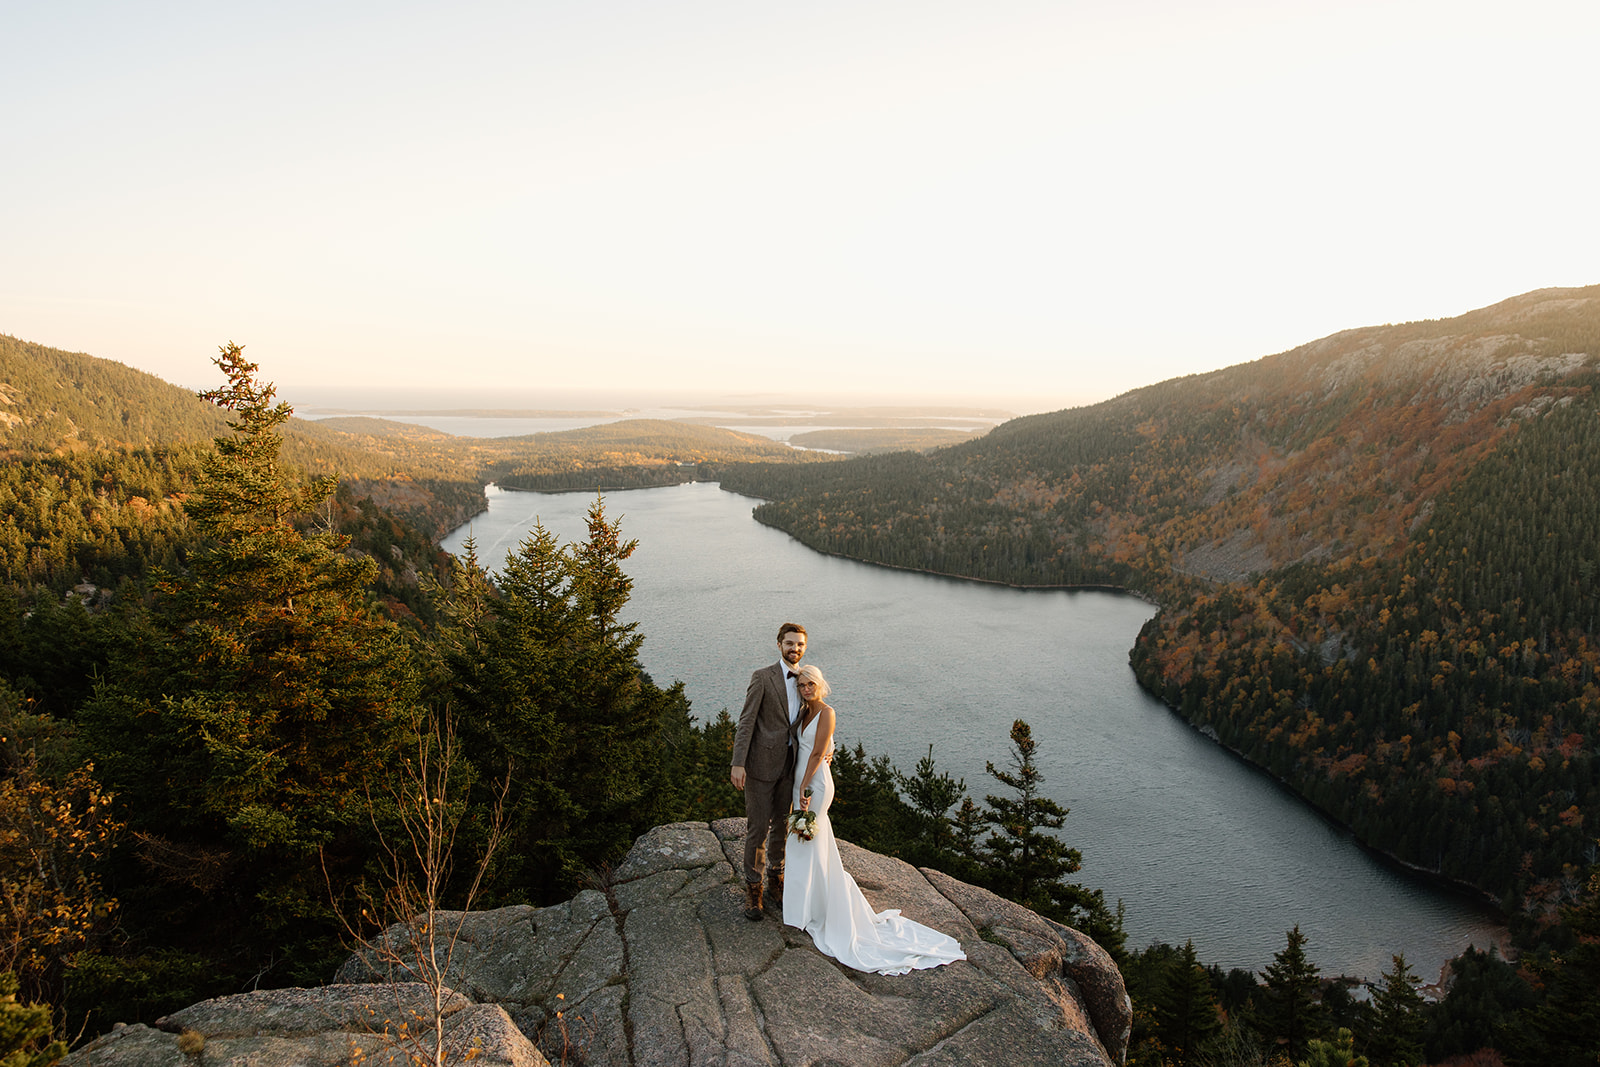 Bubble rock elopement and vows in the Fall. Acadia national park elopement and microwedding. 